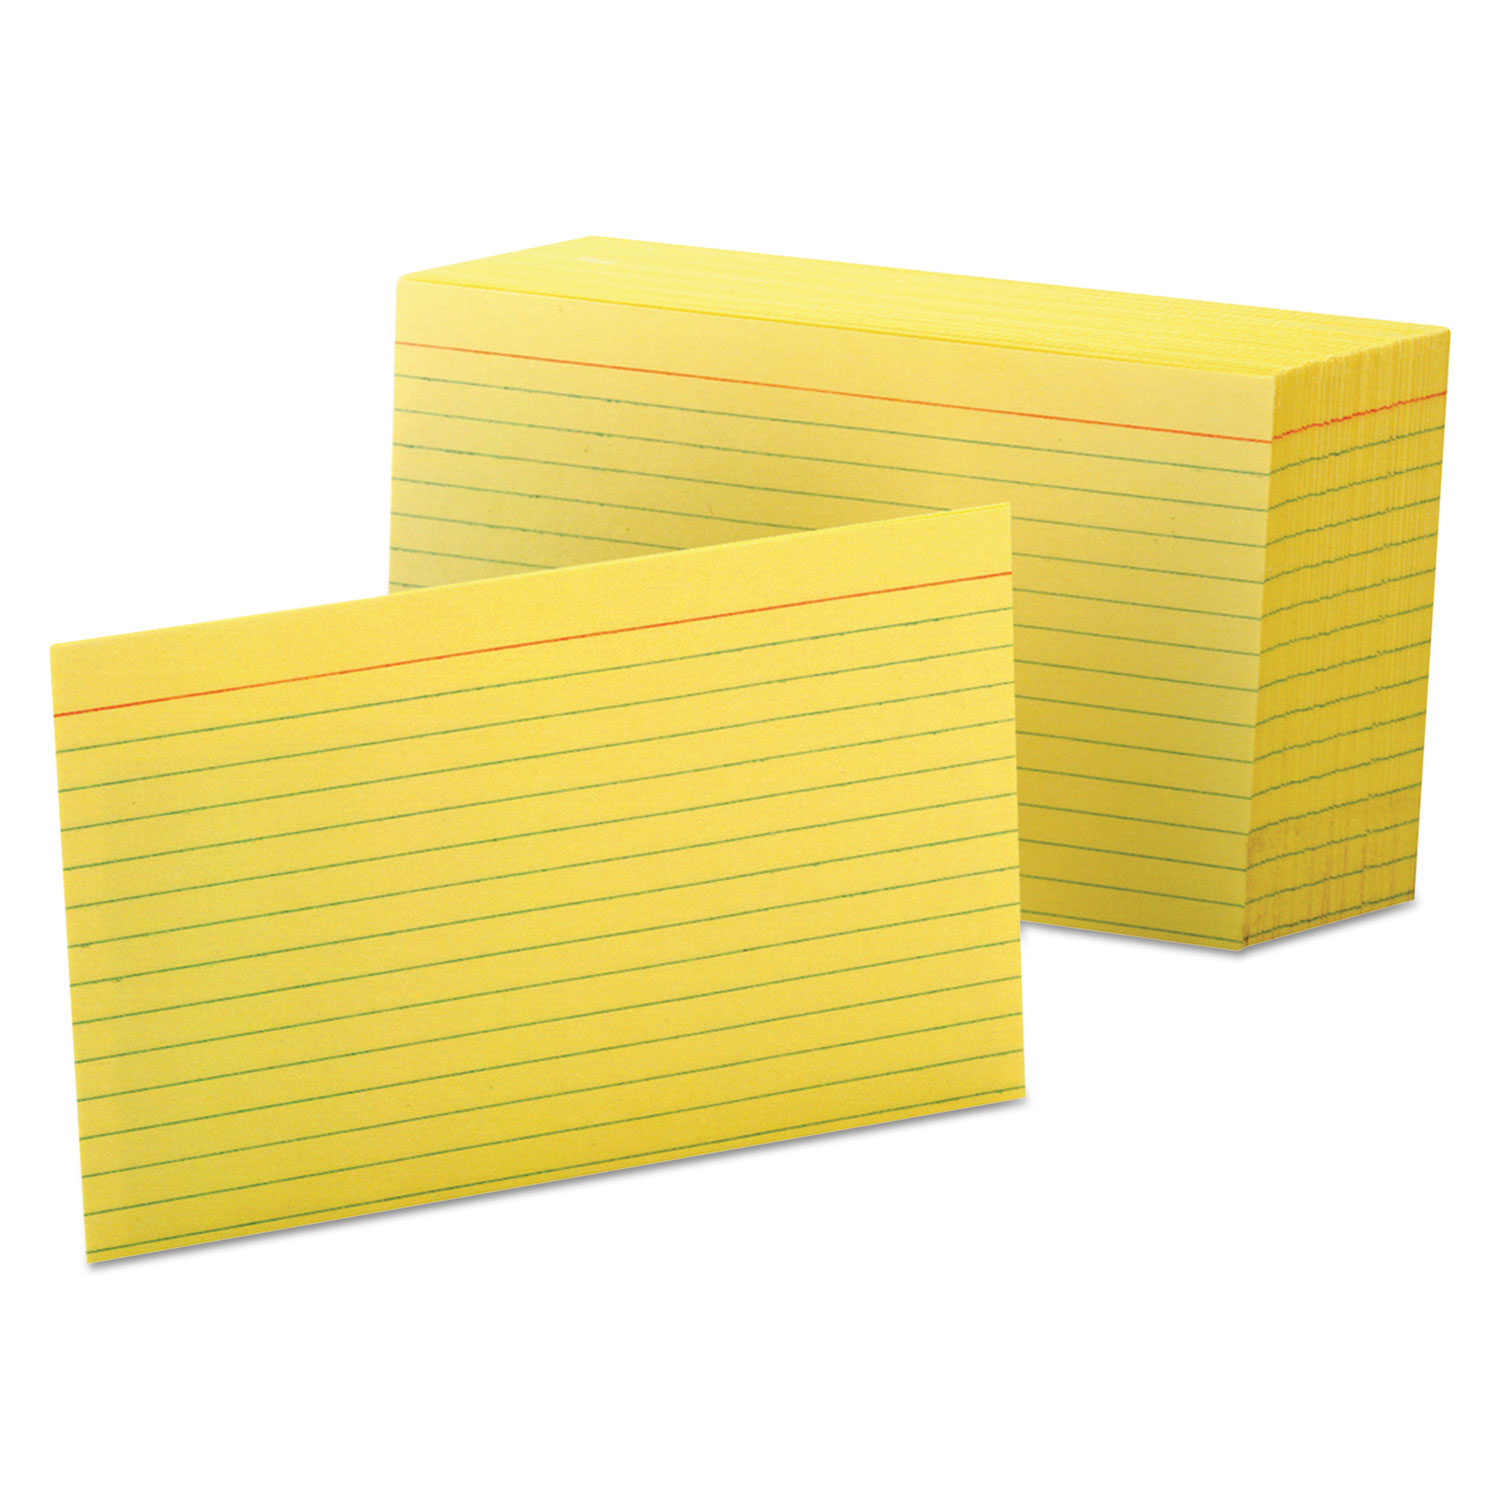  Oxford 7421 CAN Ruled Index Cards, 4 x 6, Canary, 100/Pack (OXF7421CAN) 